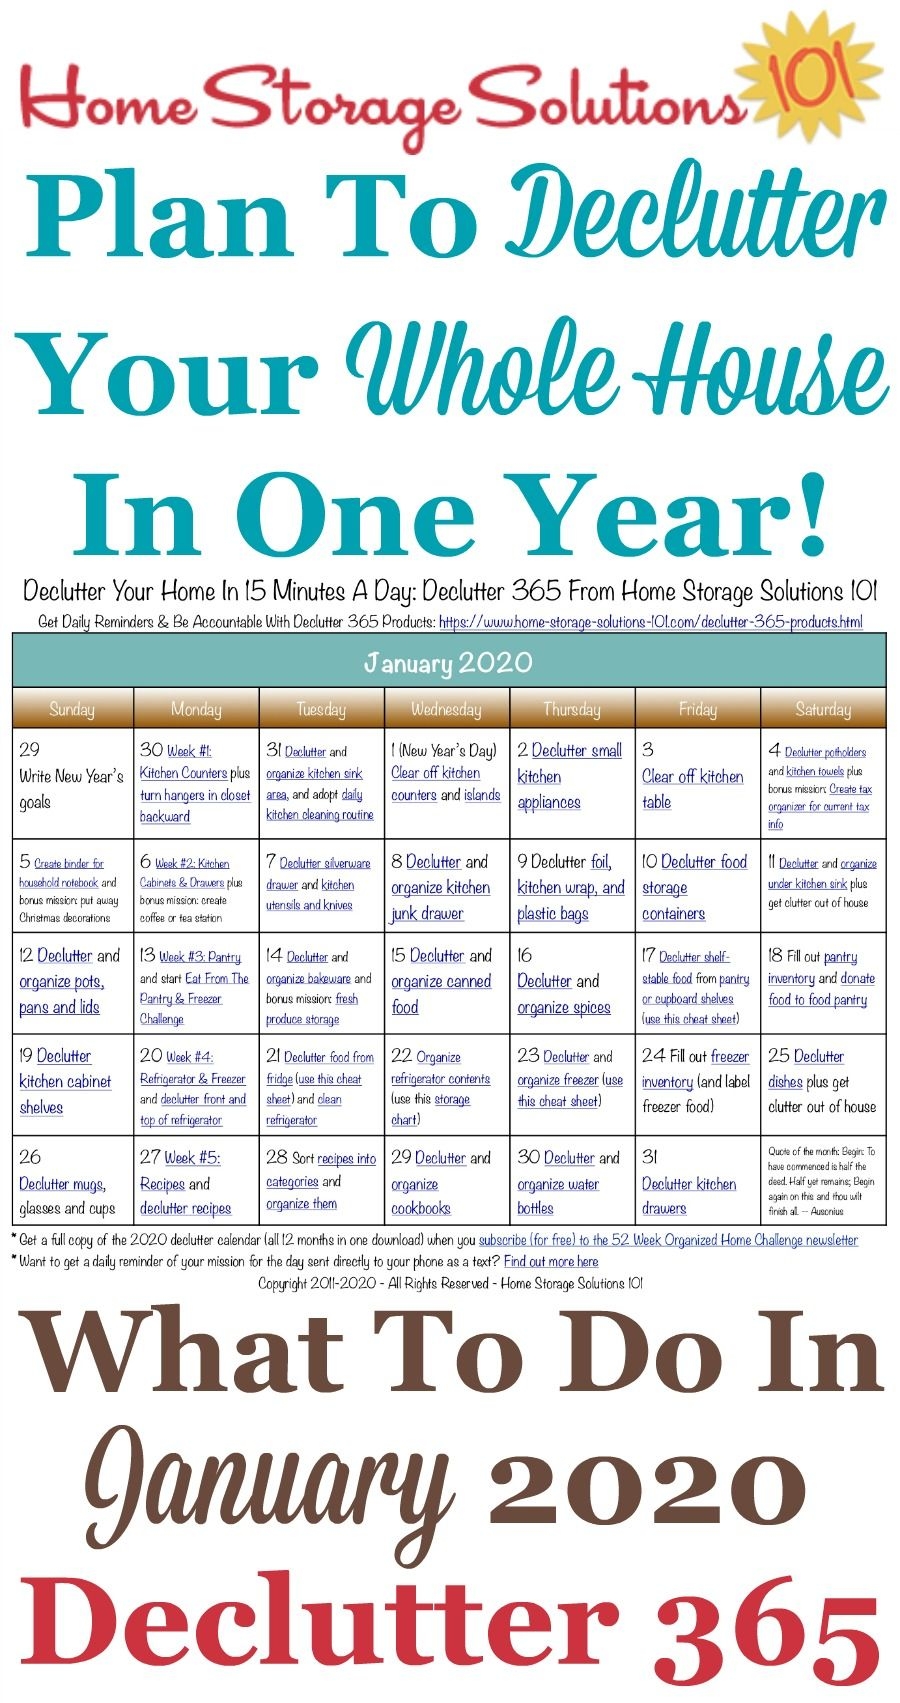 January Declutter Calendar: 15 Minute Daily Missions For Month